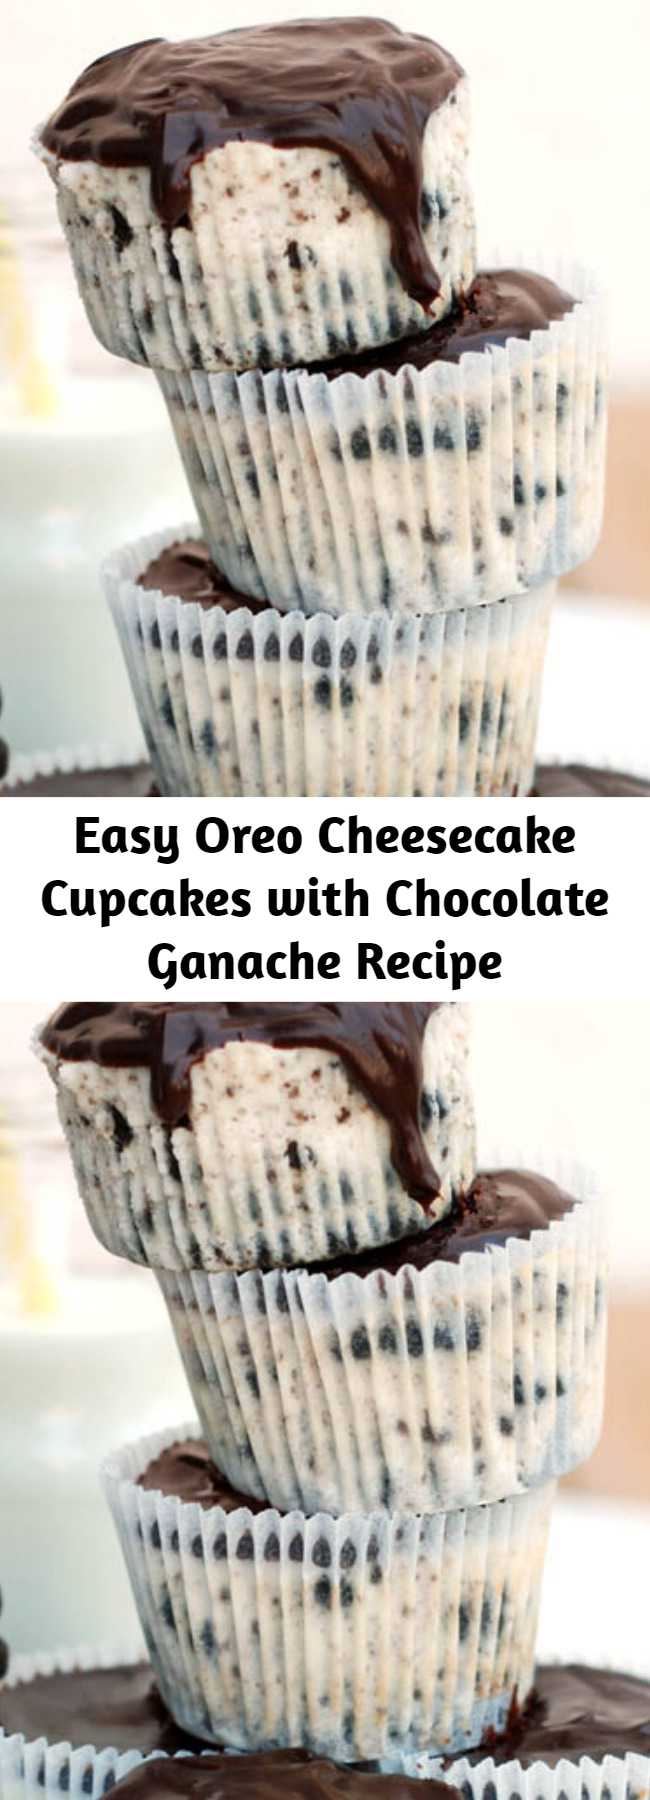 Easy Oreo Cheesecake Cupcakes with Chocolate Ganache Recipe - Oreo Cheesecake Cupcakes with Chocolate Ganache are delicious mini cheesecakes loaded with Oreo chunks & topped with rich chocolate ganache. They’re so tasty!